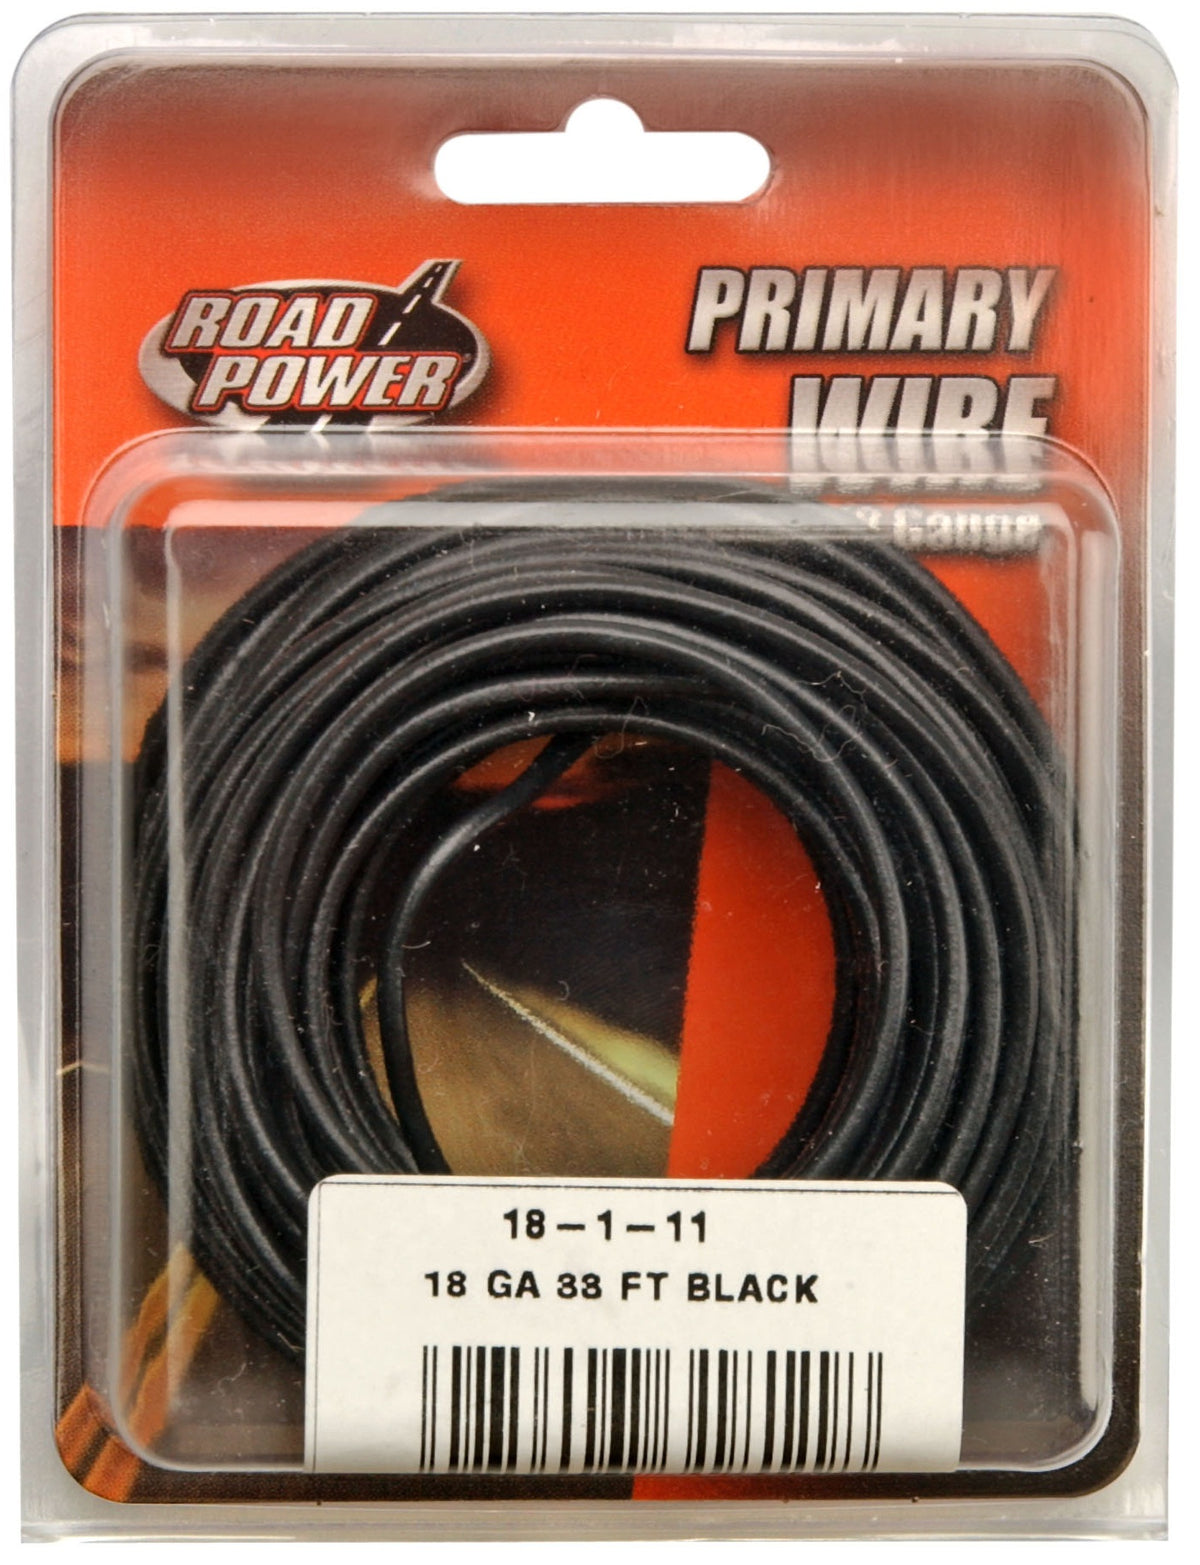 Road Power 55667333 Primary Electrical Wire, 18 Gauge, 33', Black